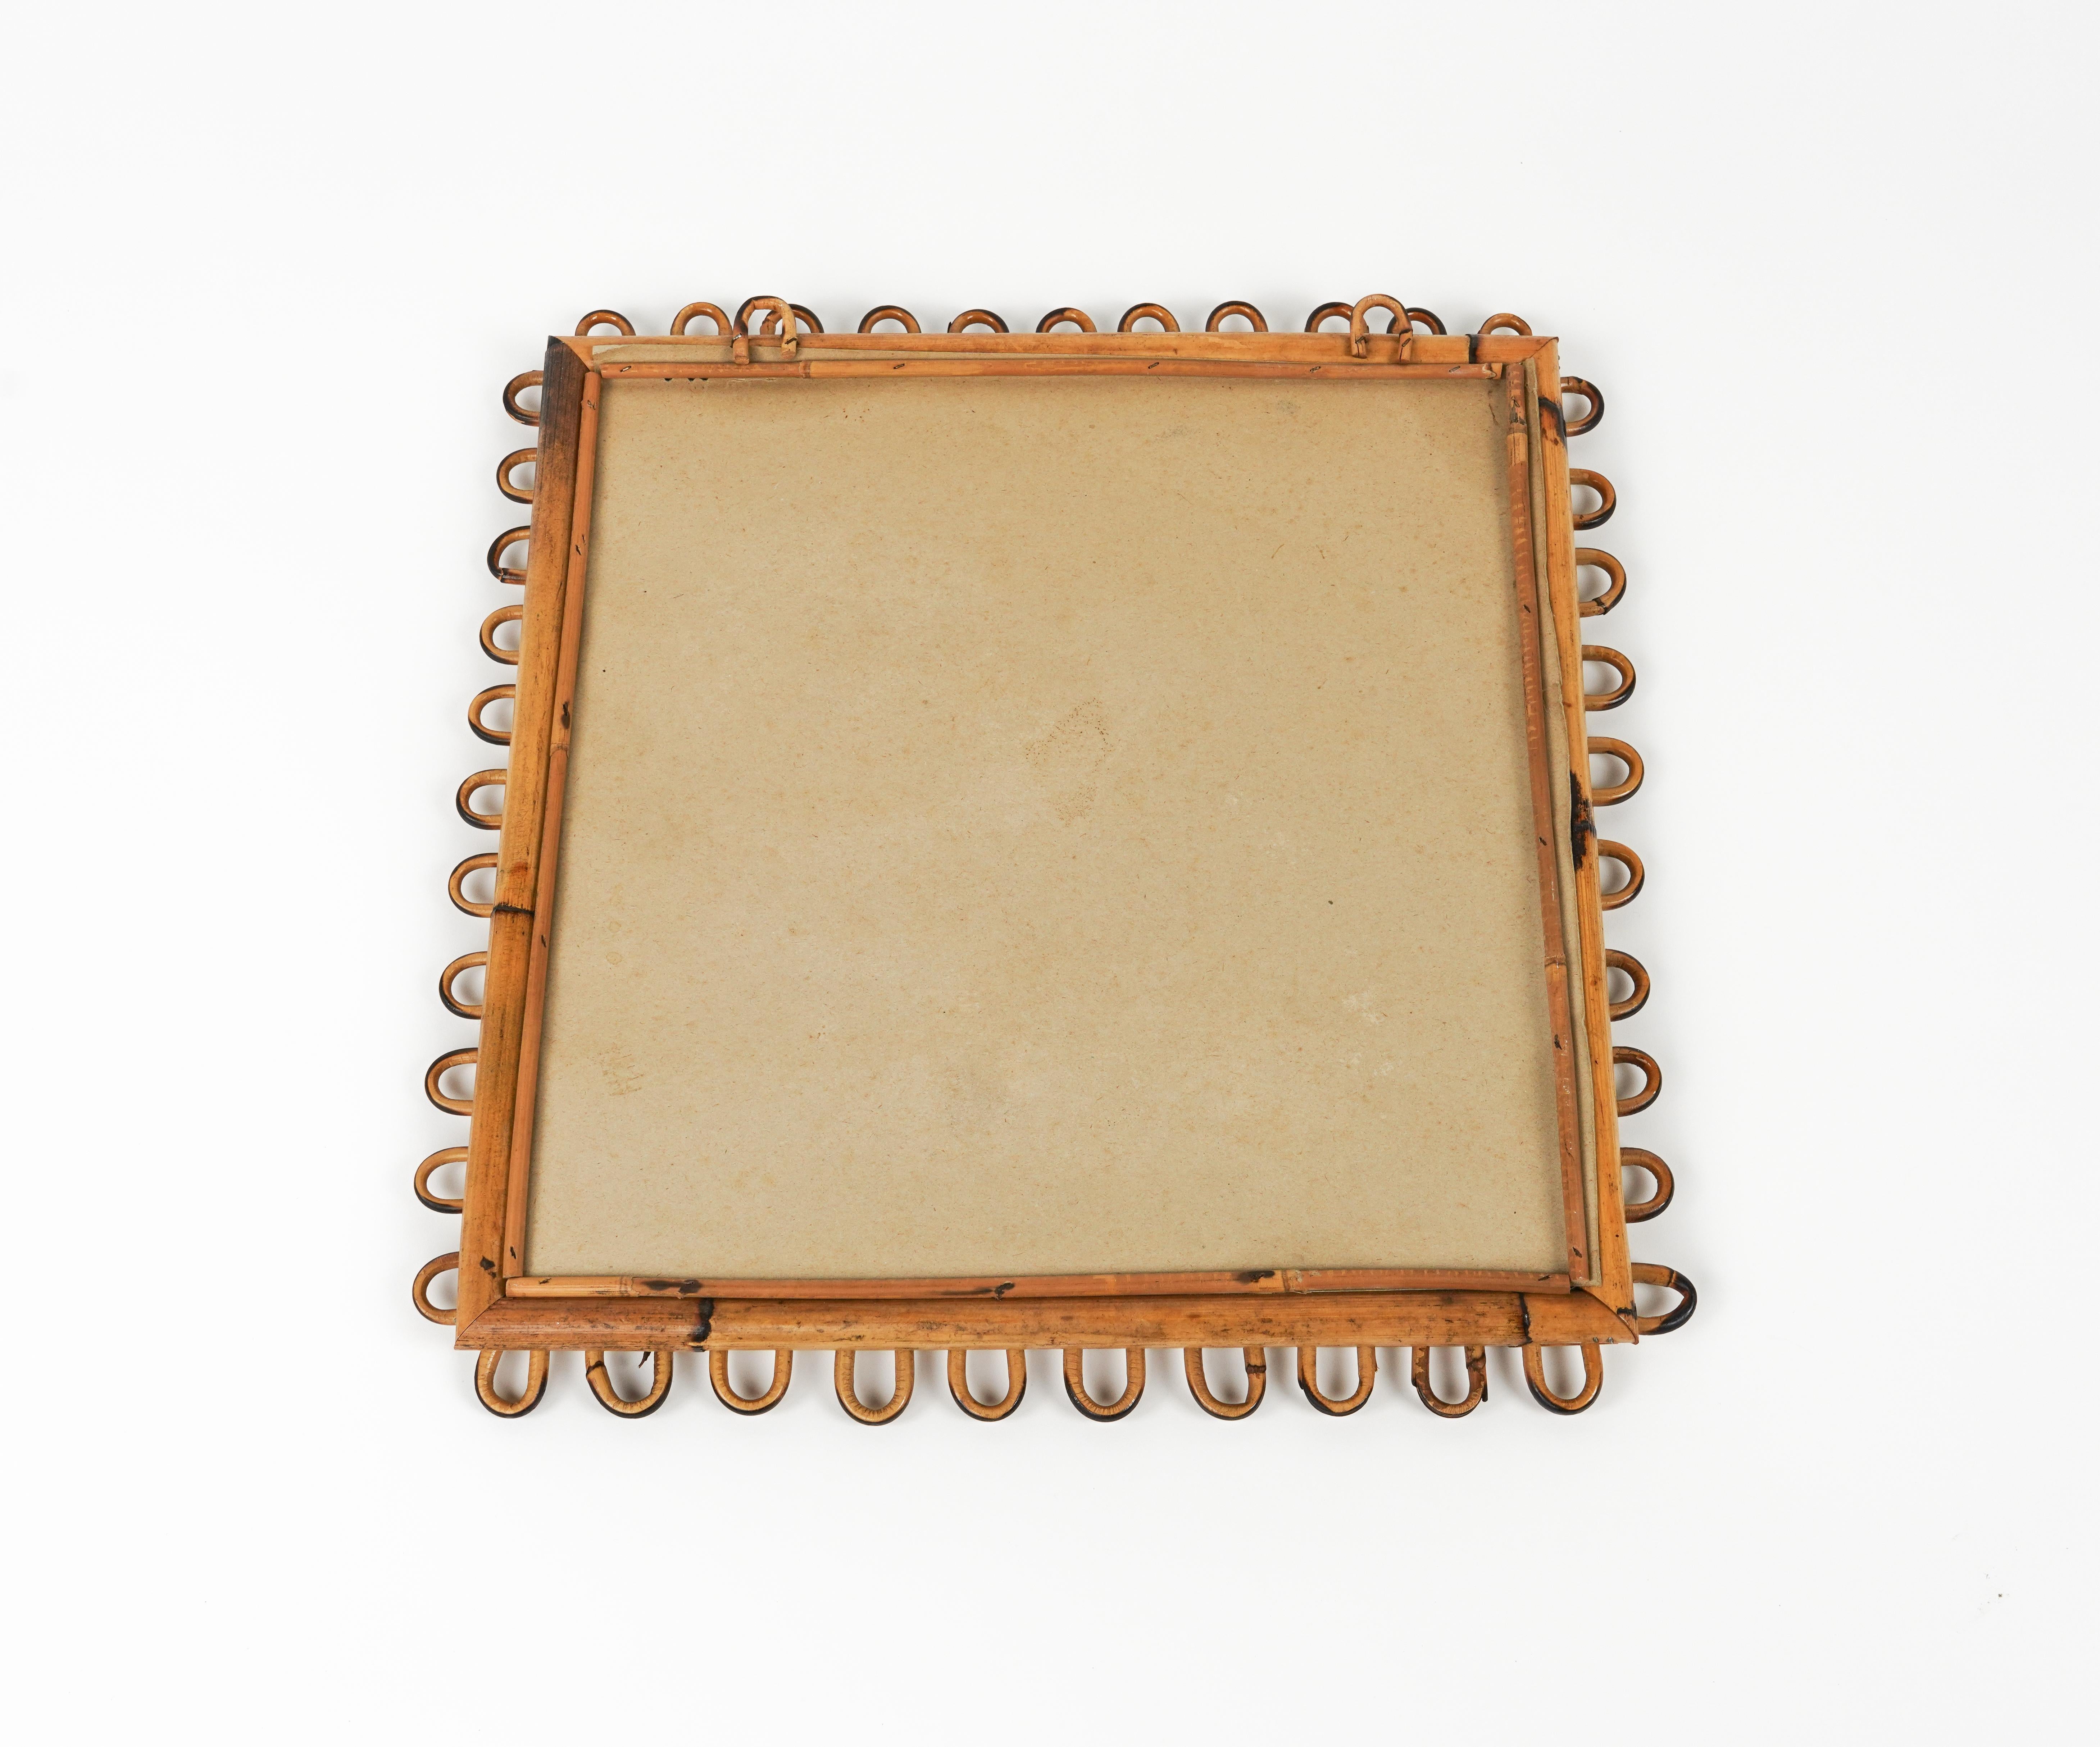 Midcentury Rattan & Bamboo Squared Wall Mirror Franco Albini Style, Italy 1960s For Sale 9